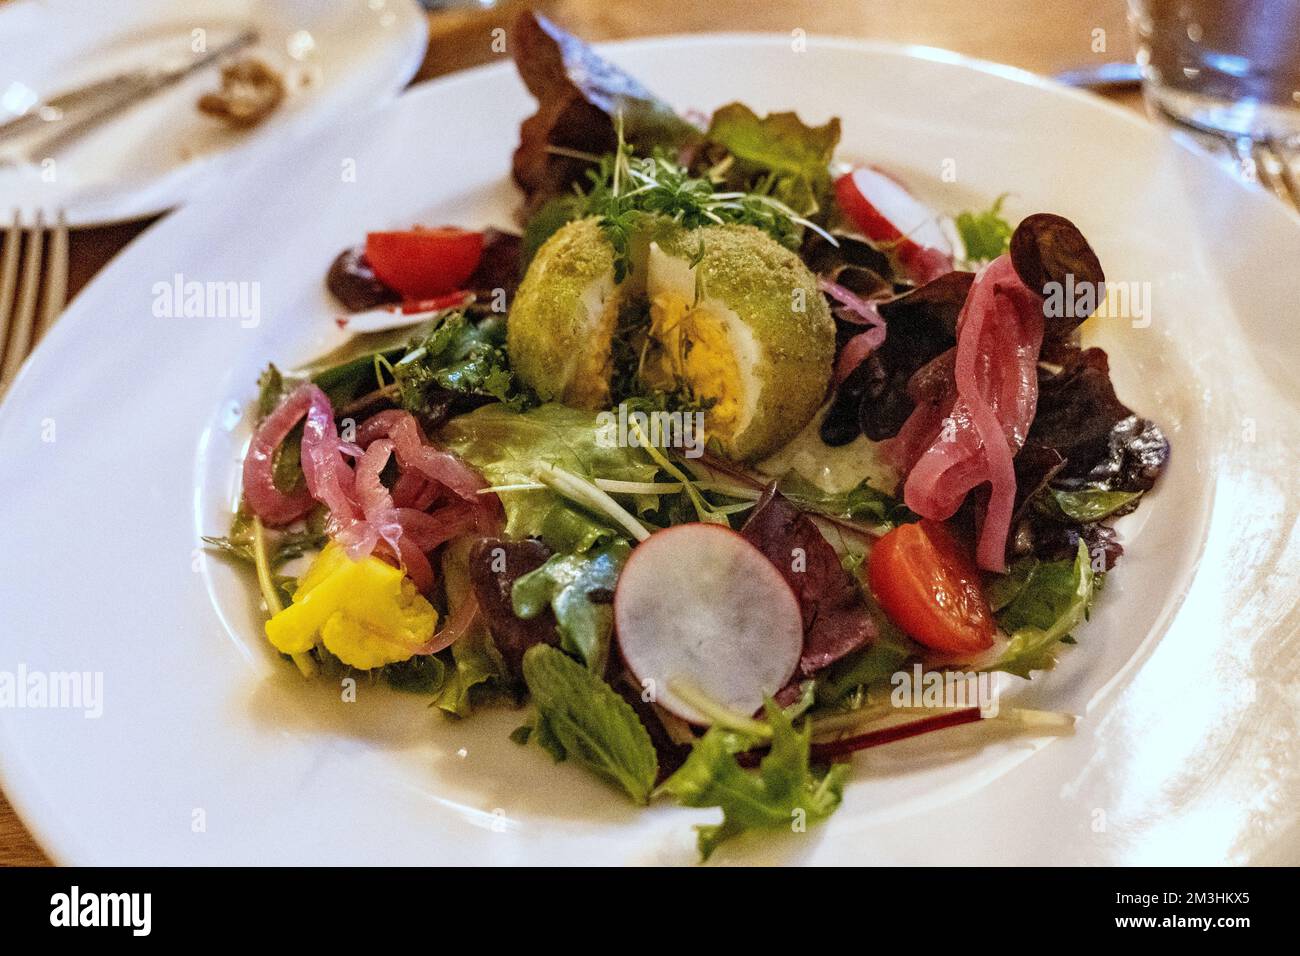 Dinner Salad at Eberbach Monastery in Germany Stock Photo